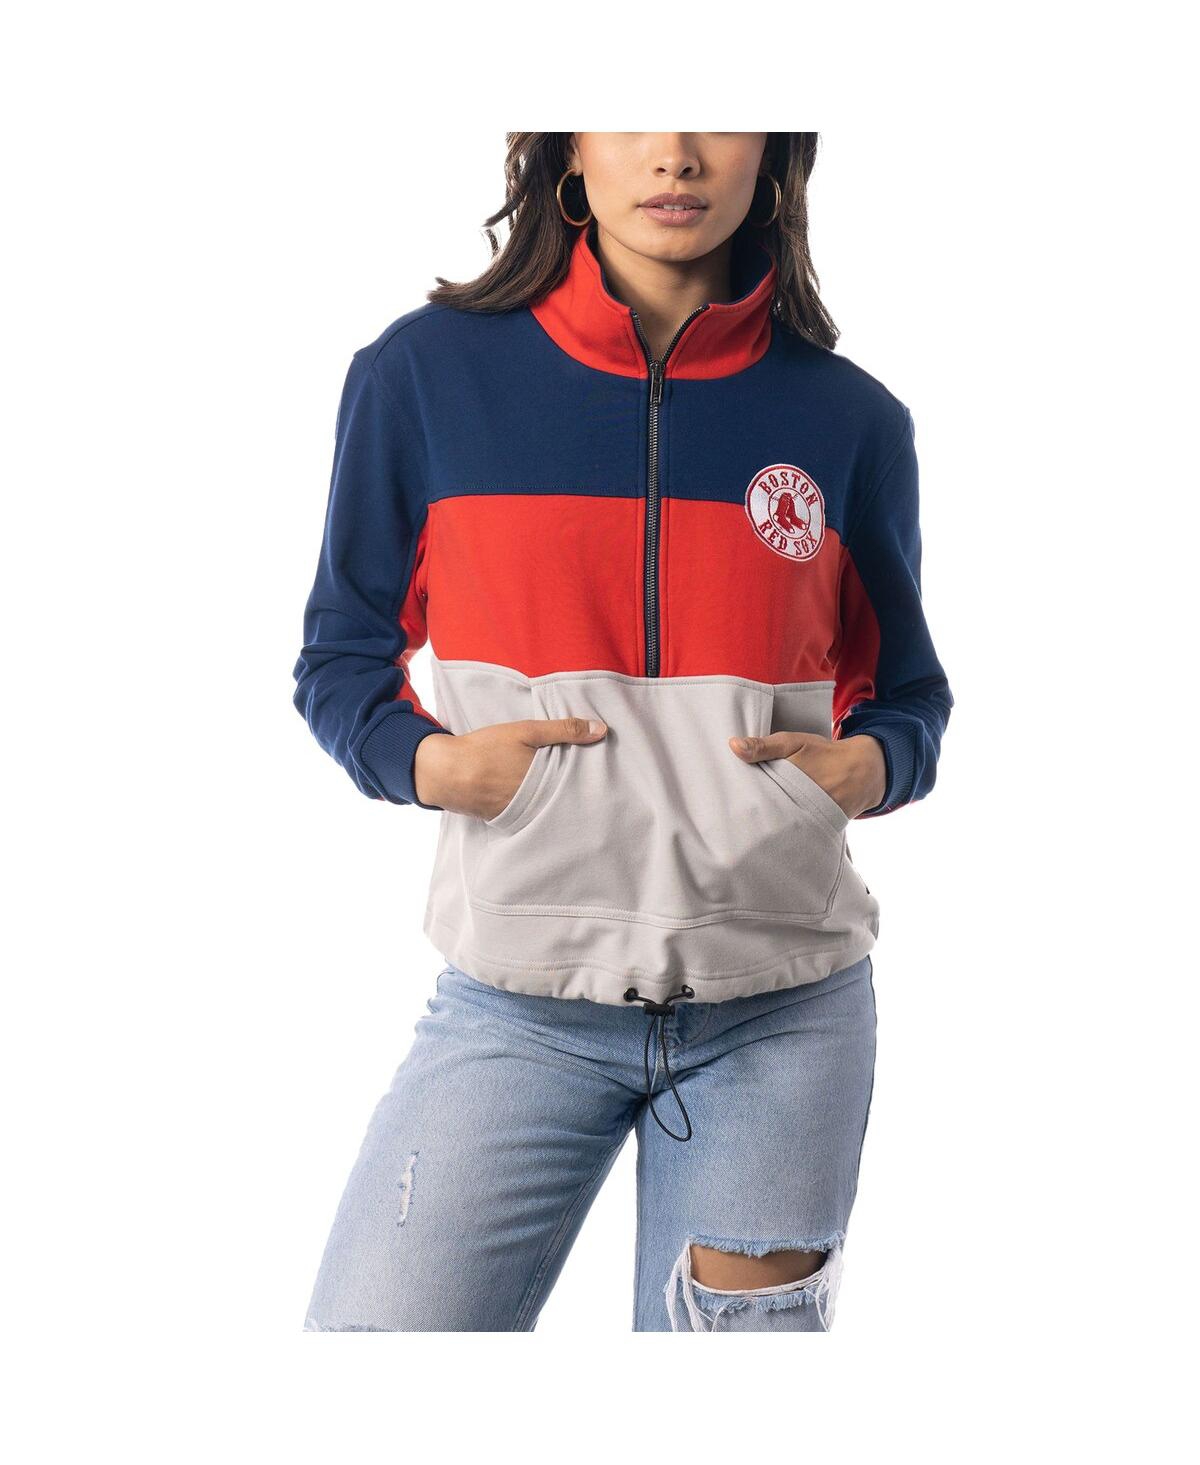 THE WILD COLLECTIVE WOMEN'S THE WILD COLLECTIVE NAVY, RED BOSTON RED SOX COLORBLOCK 1/4 ZIP JACKET